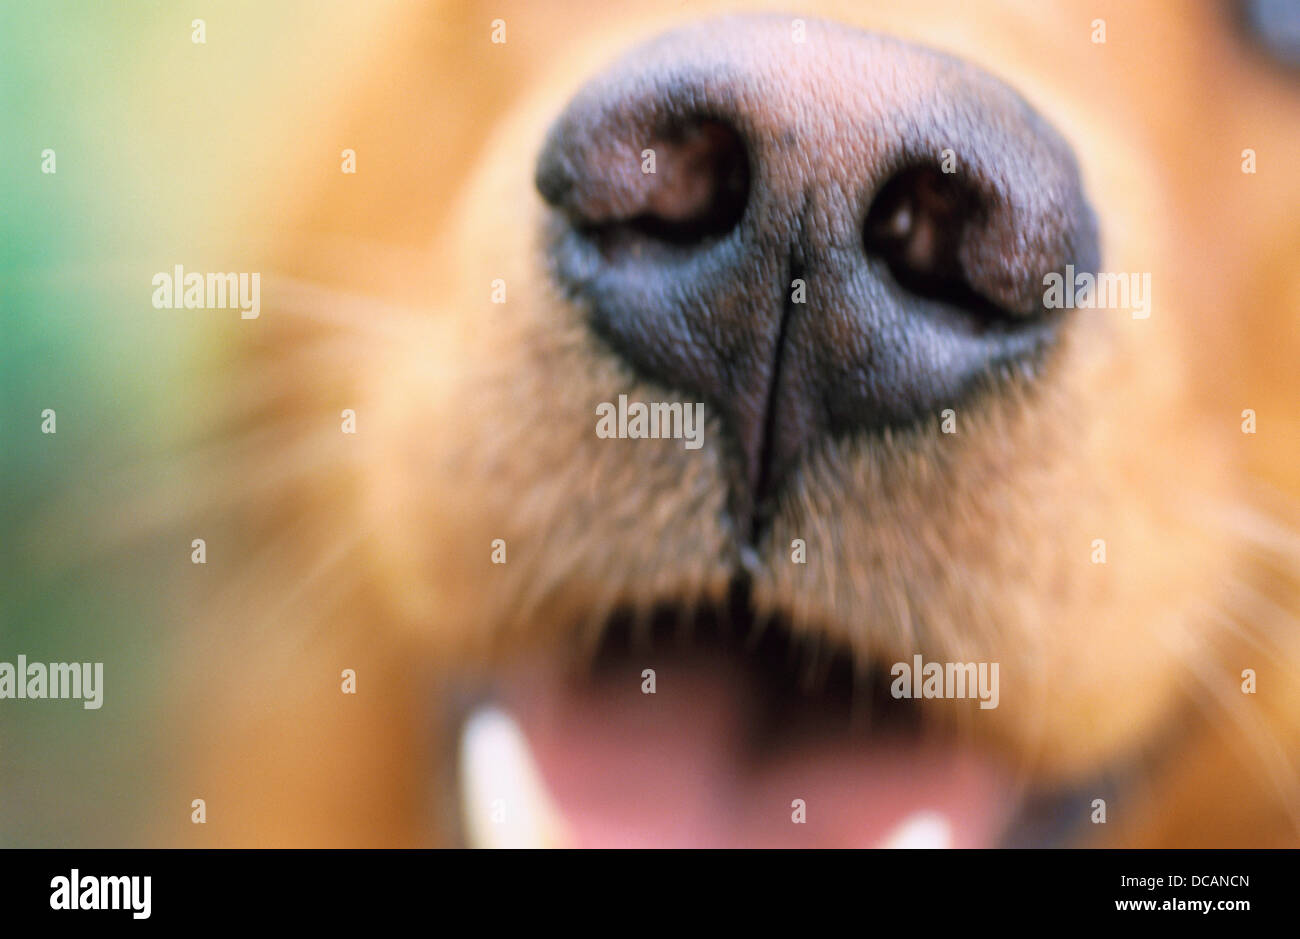 Straight on close-up of a nose and mouth of a golden retriever dog Stock Photo